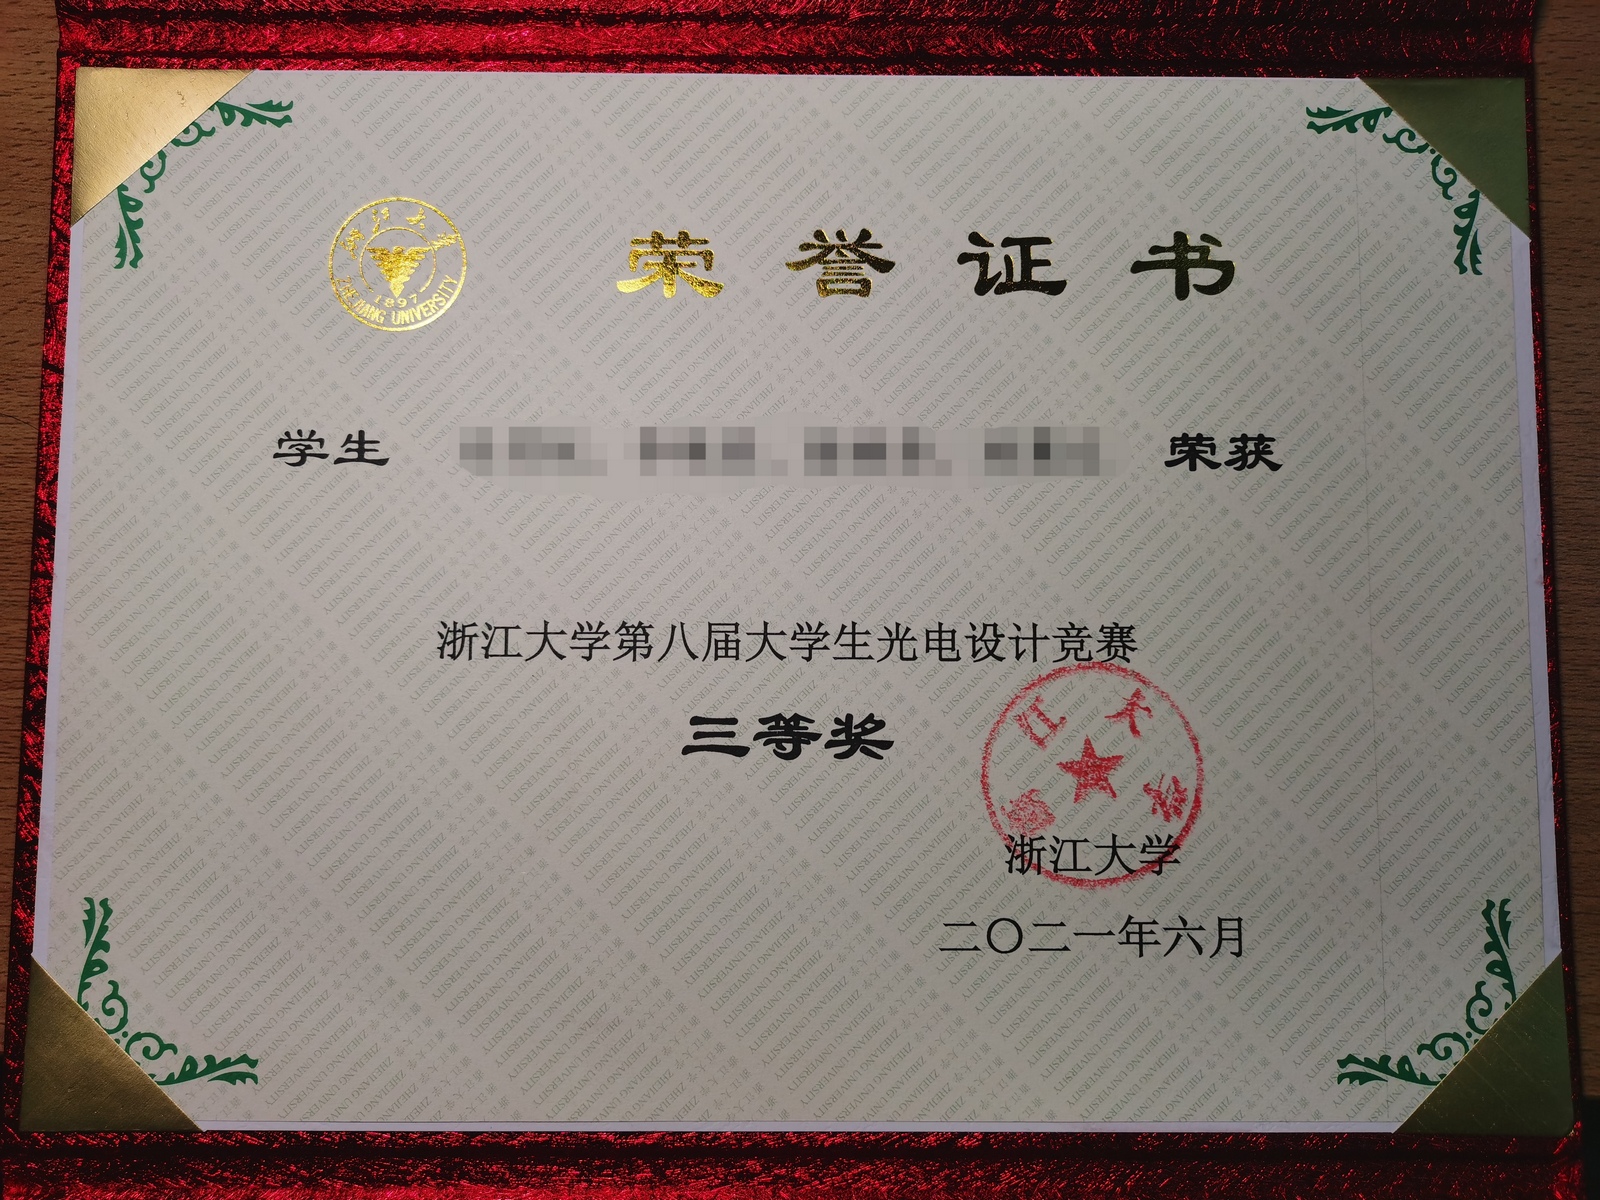 optoelectronic-design-competition-2020-award-certificate.jpg